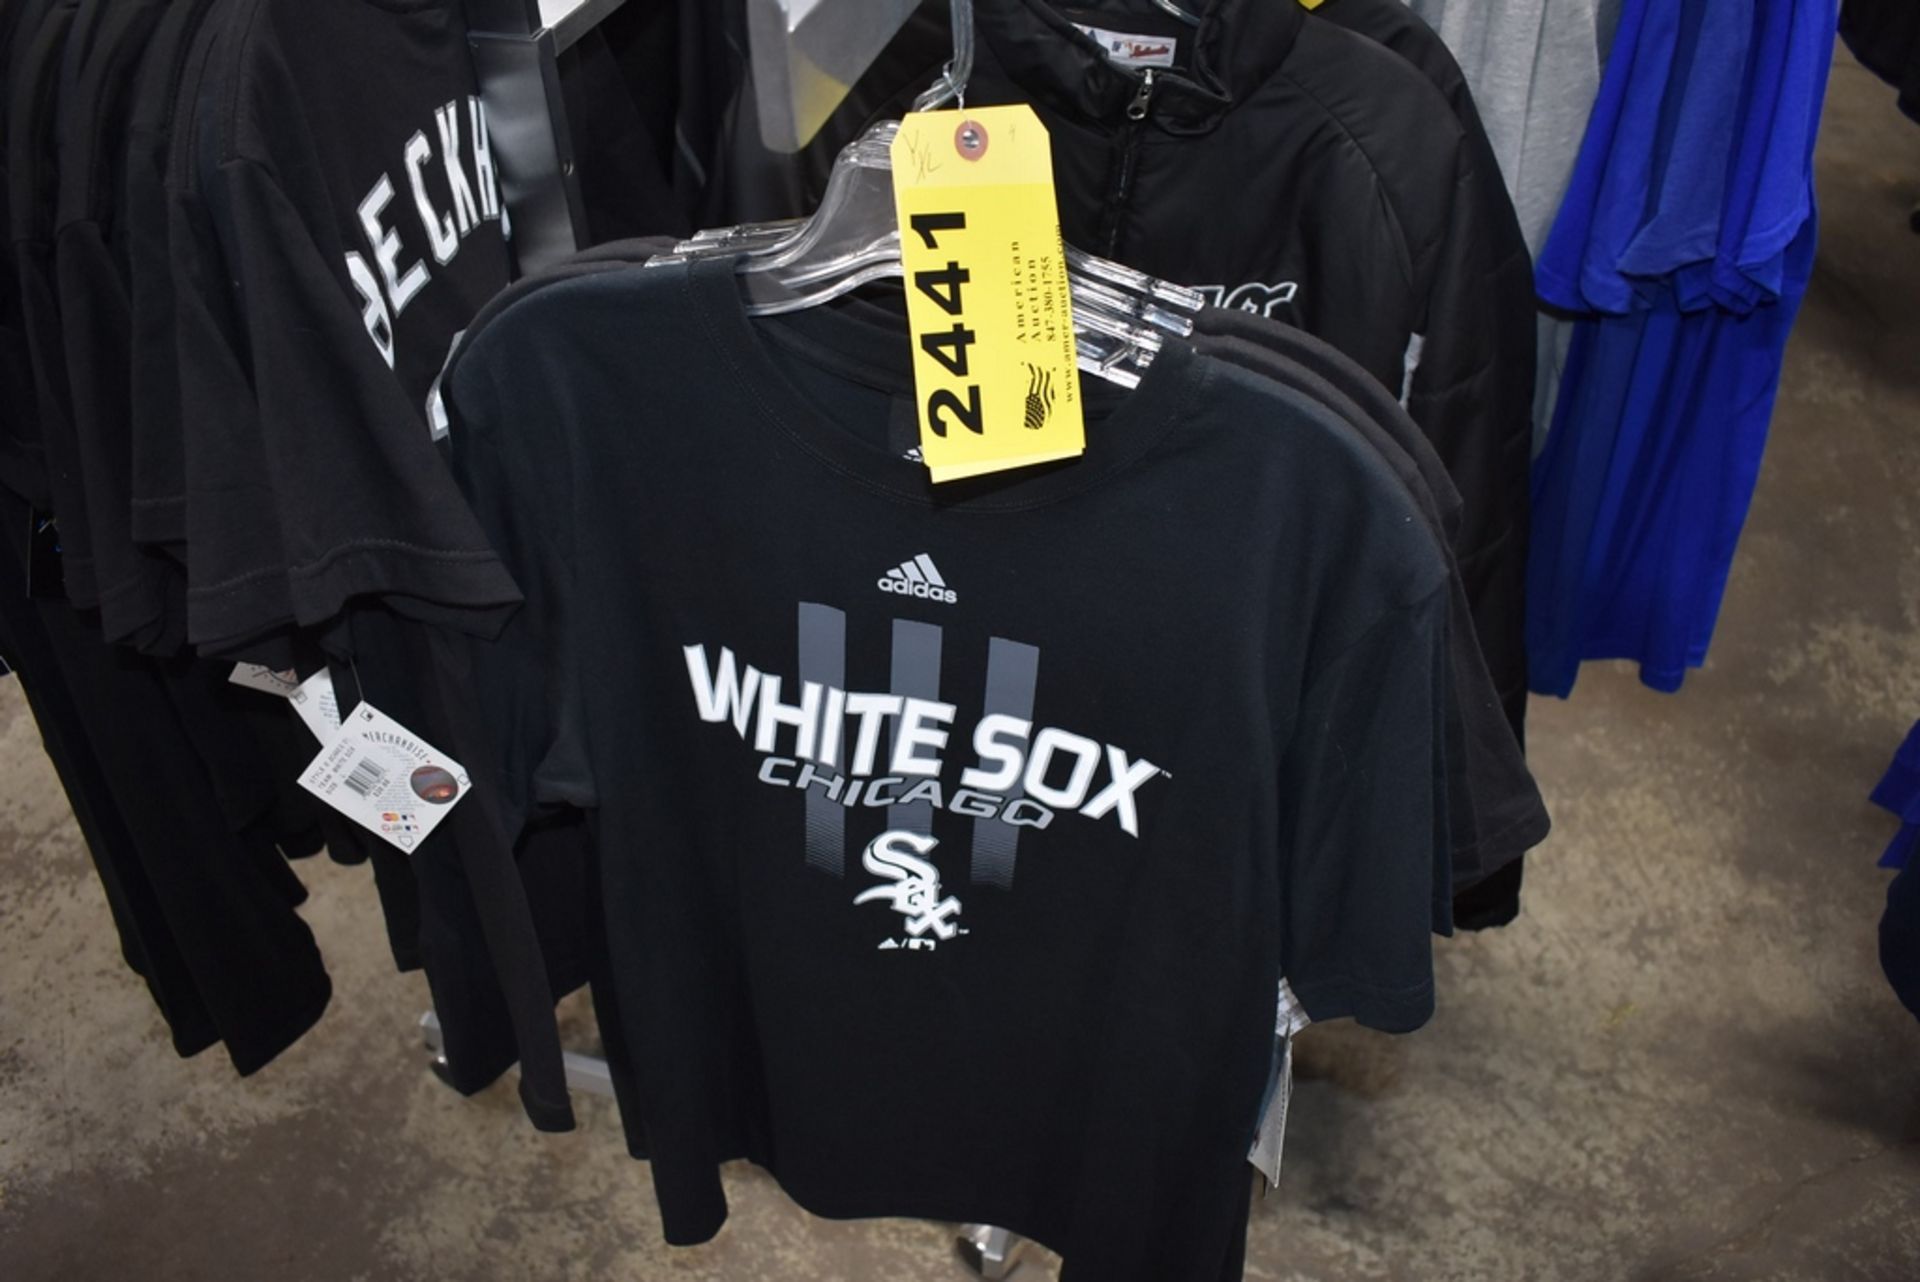 (4) CHICAGO WHITE SOX YOUTH X-LARGE T-SHIRTS